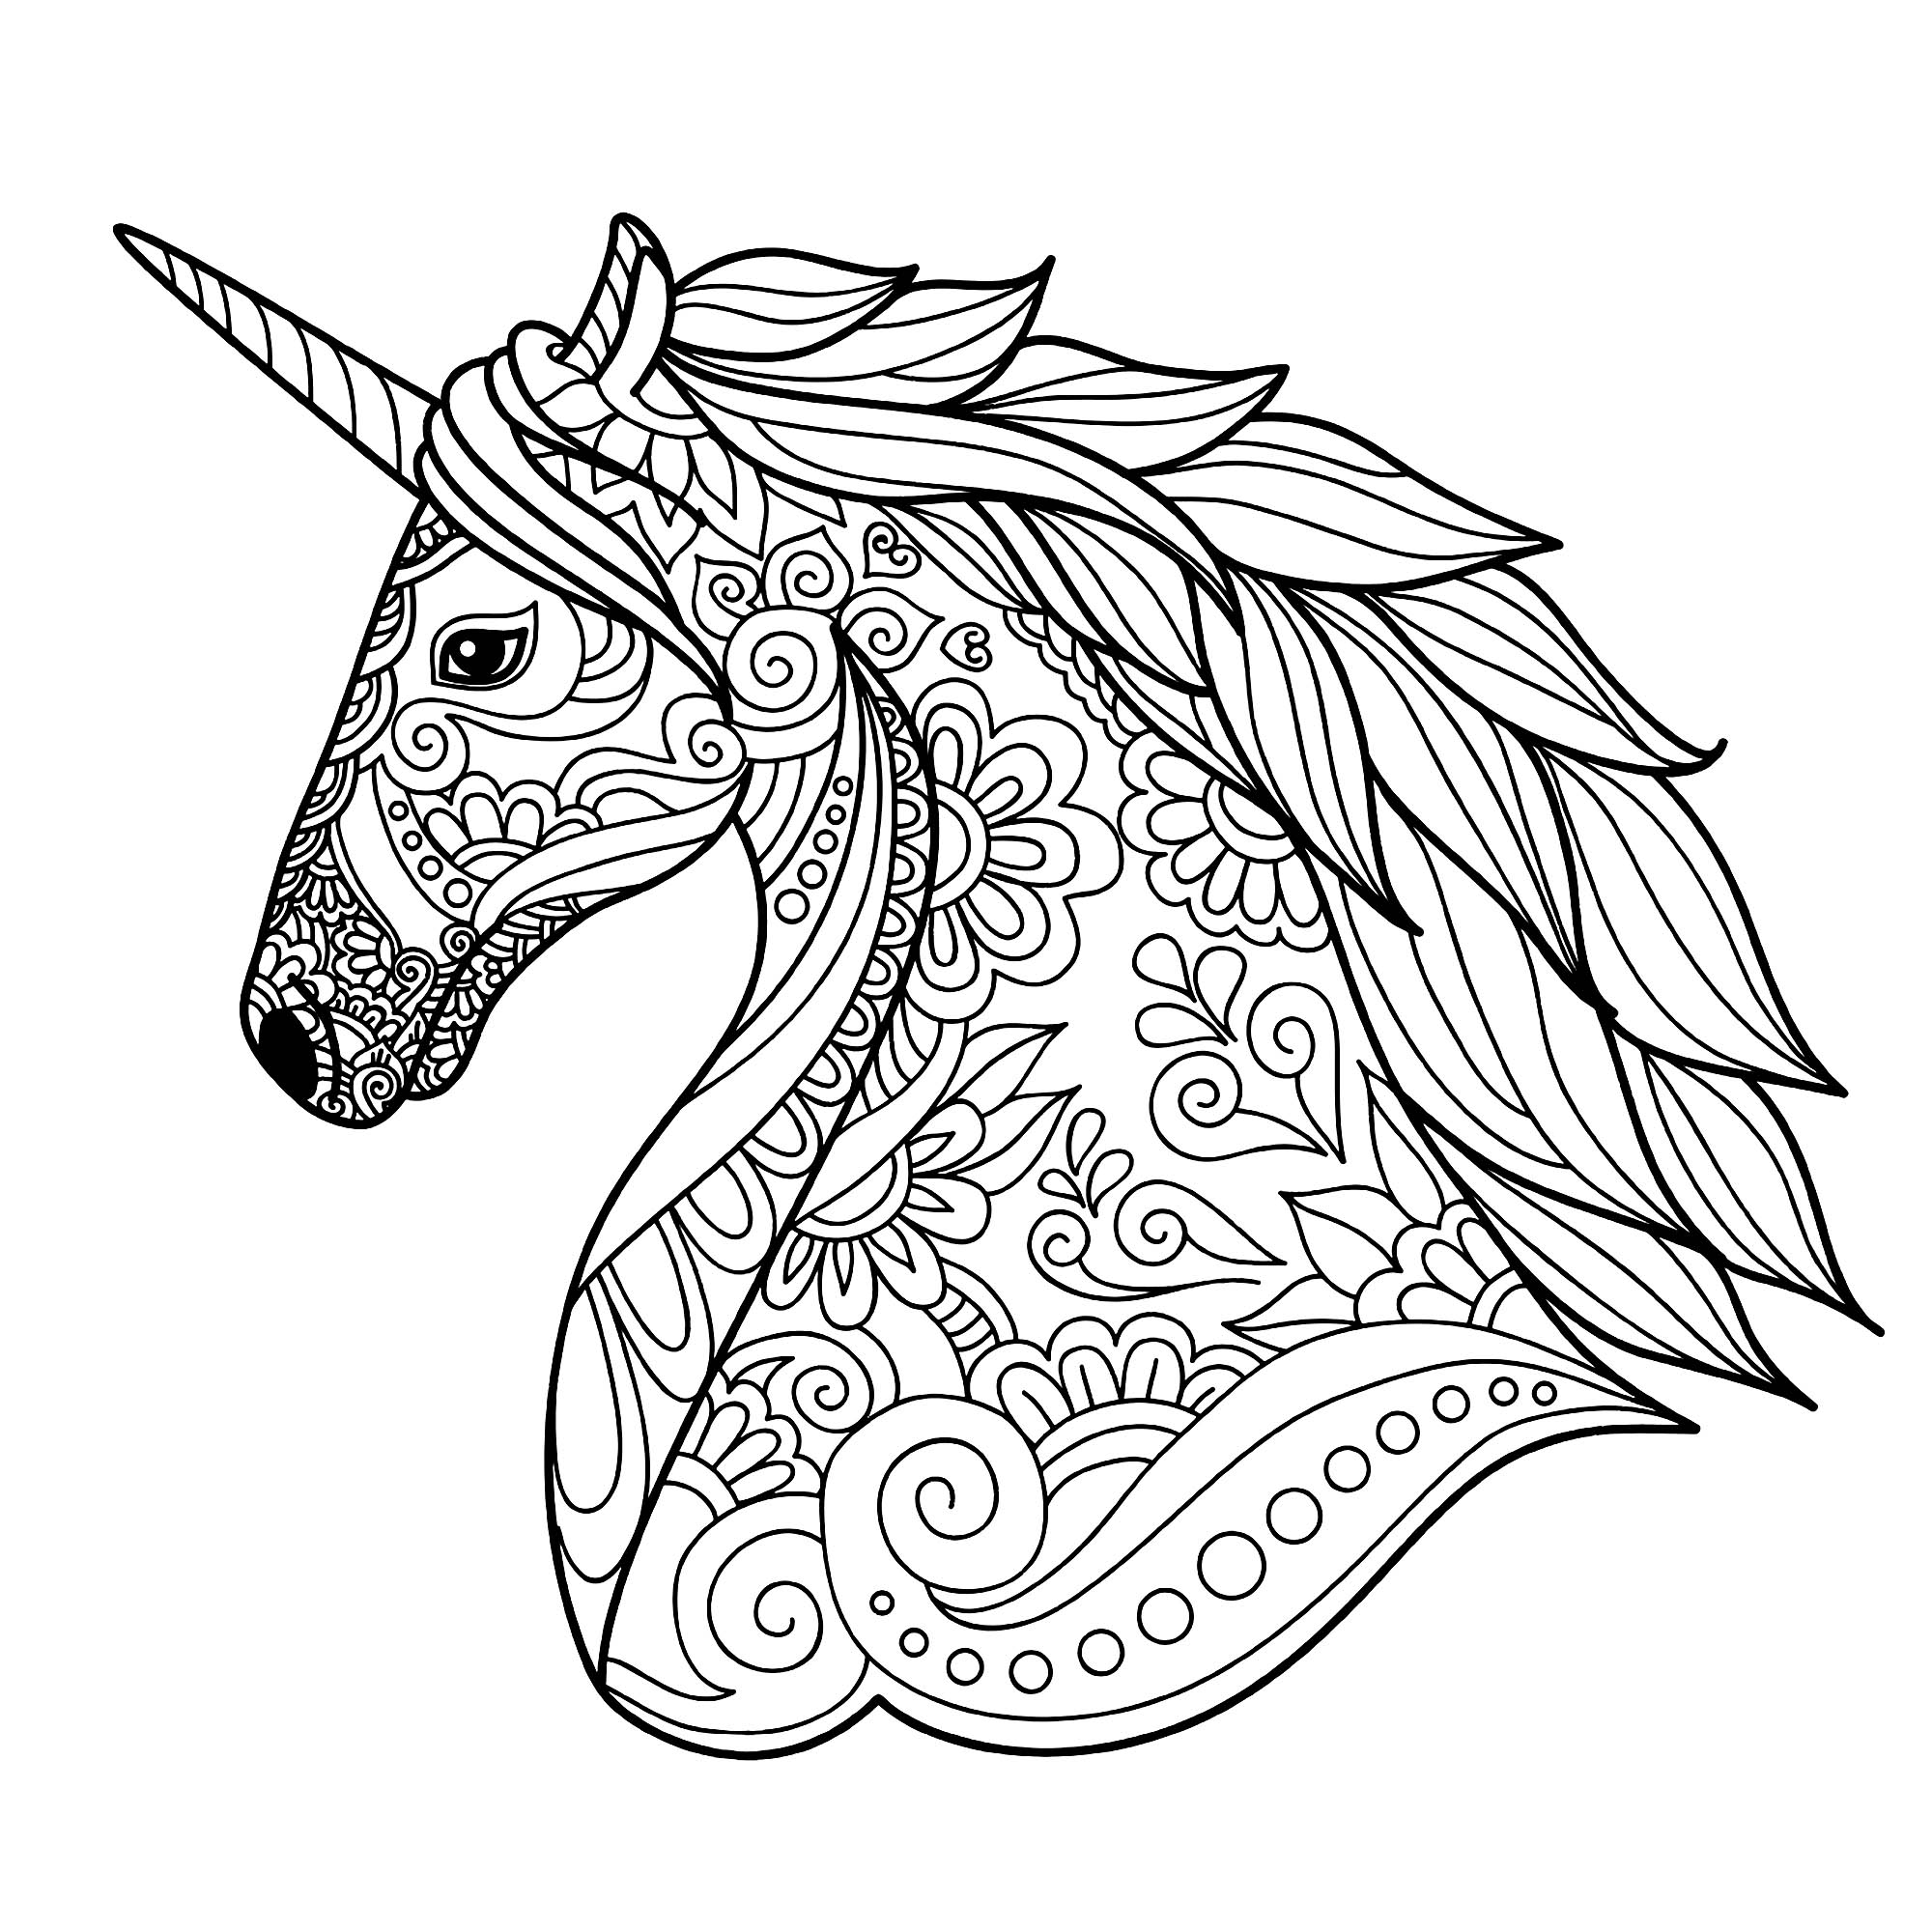 unicorn-mermaid-coloring-pages-printable-printable-word-searches